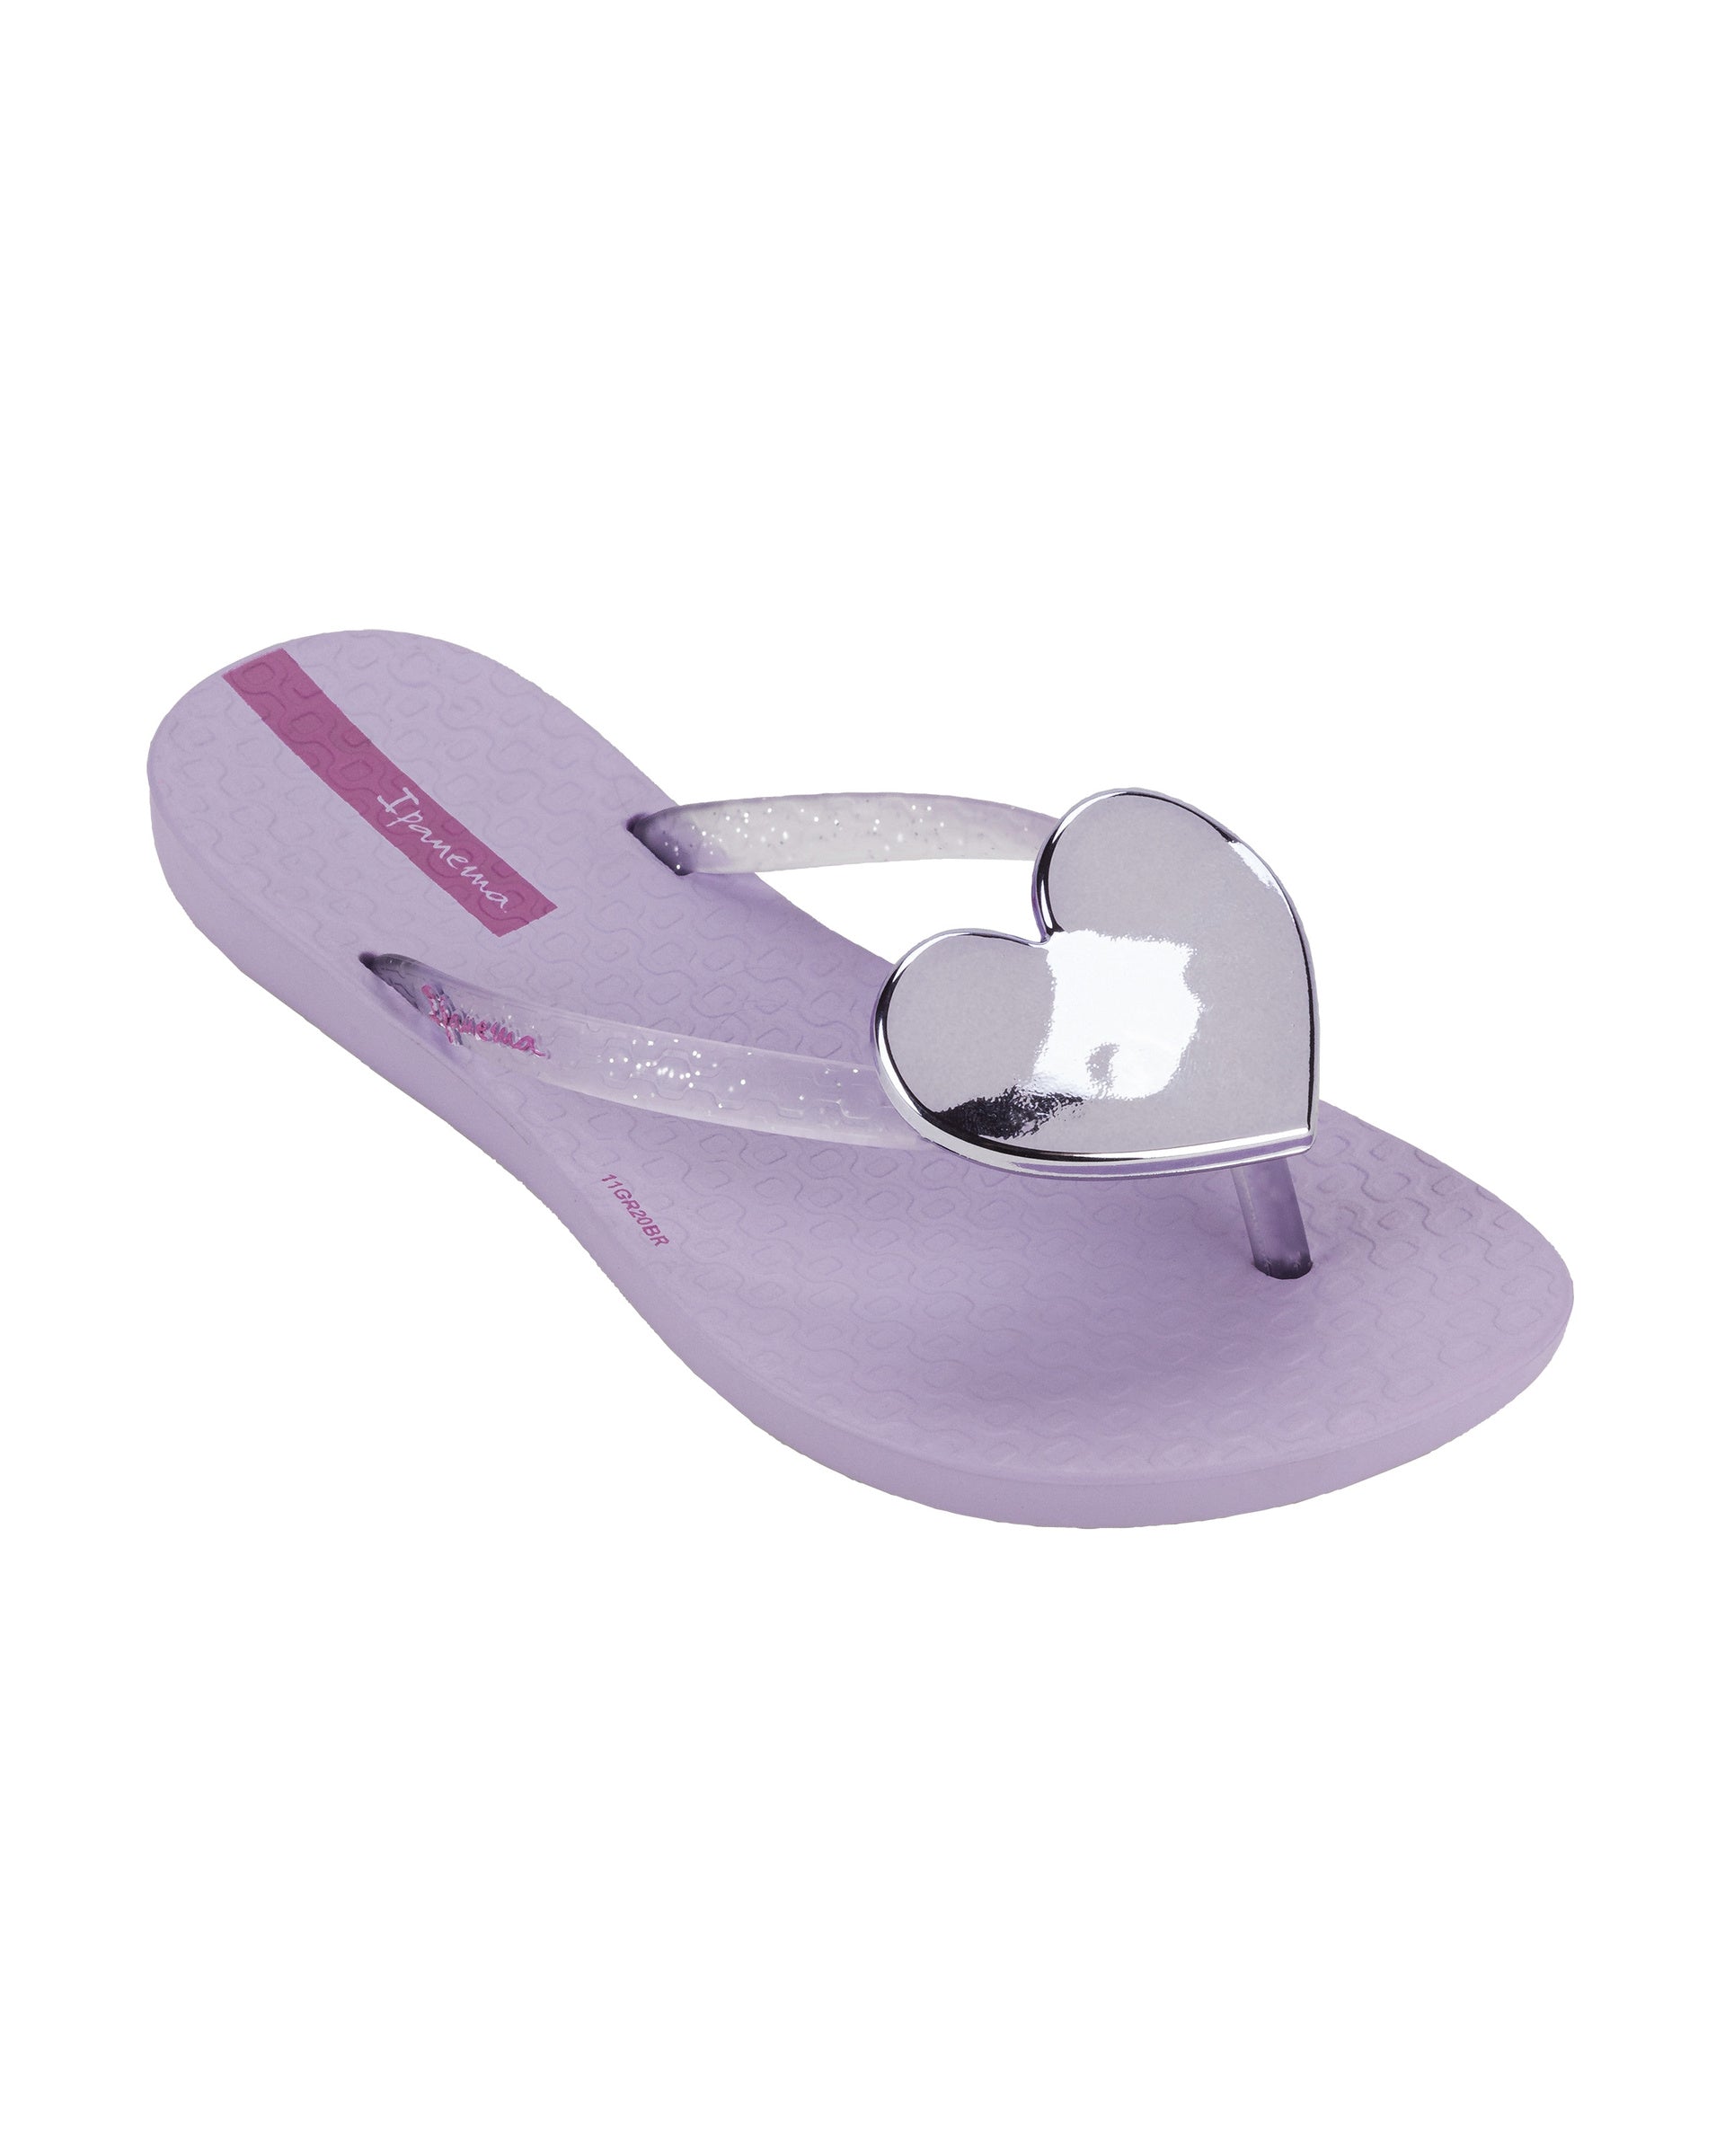 Angled view of a purple Ipanema Wave Heart kids flip flop with silver decorative heart on the clear purple upper.